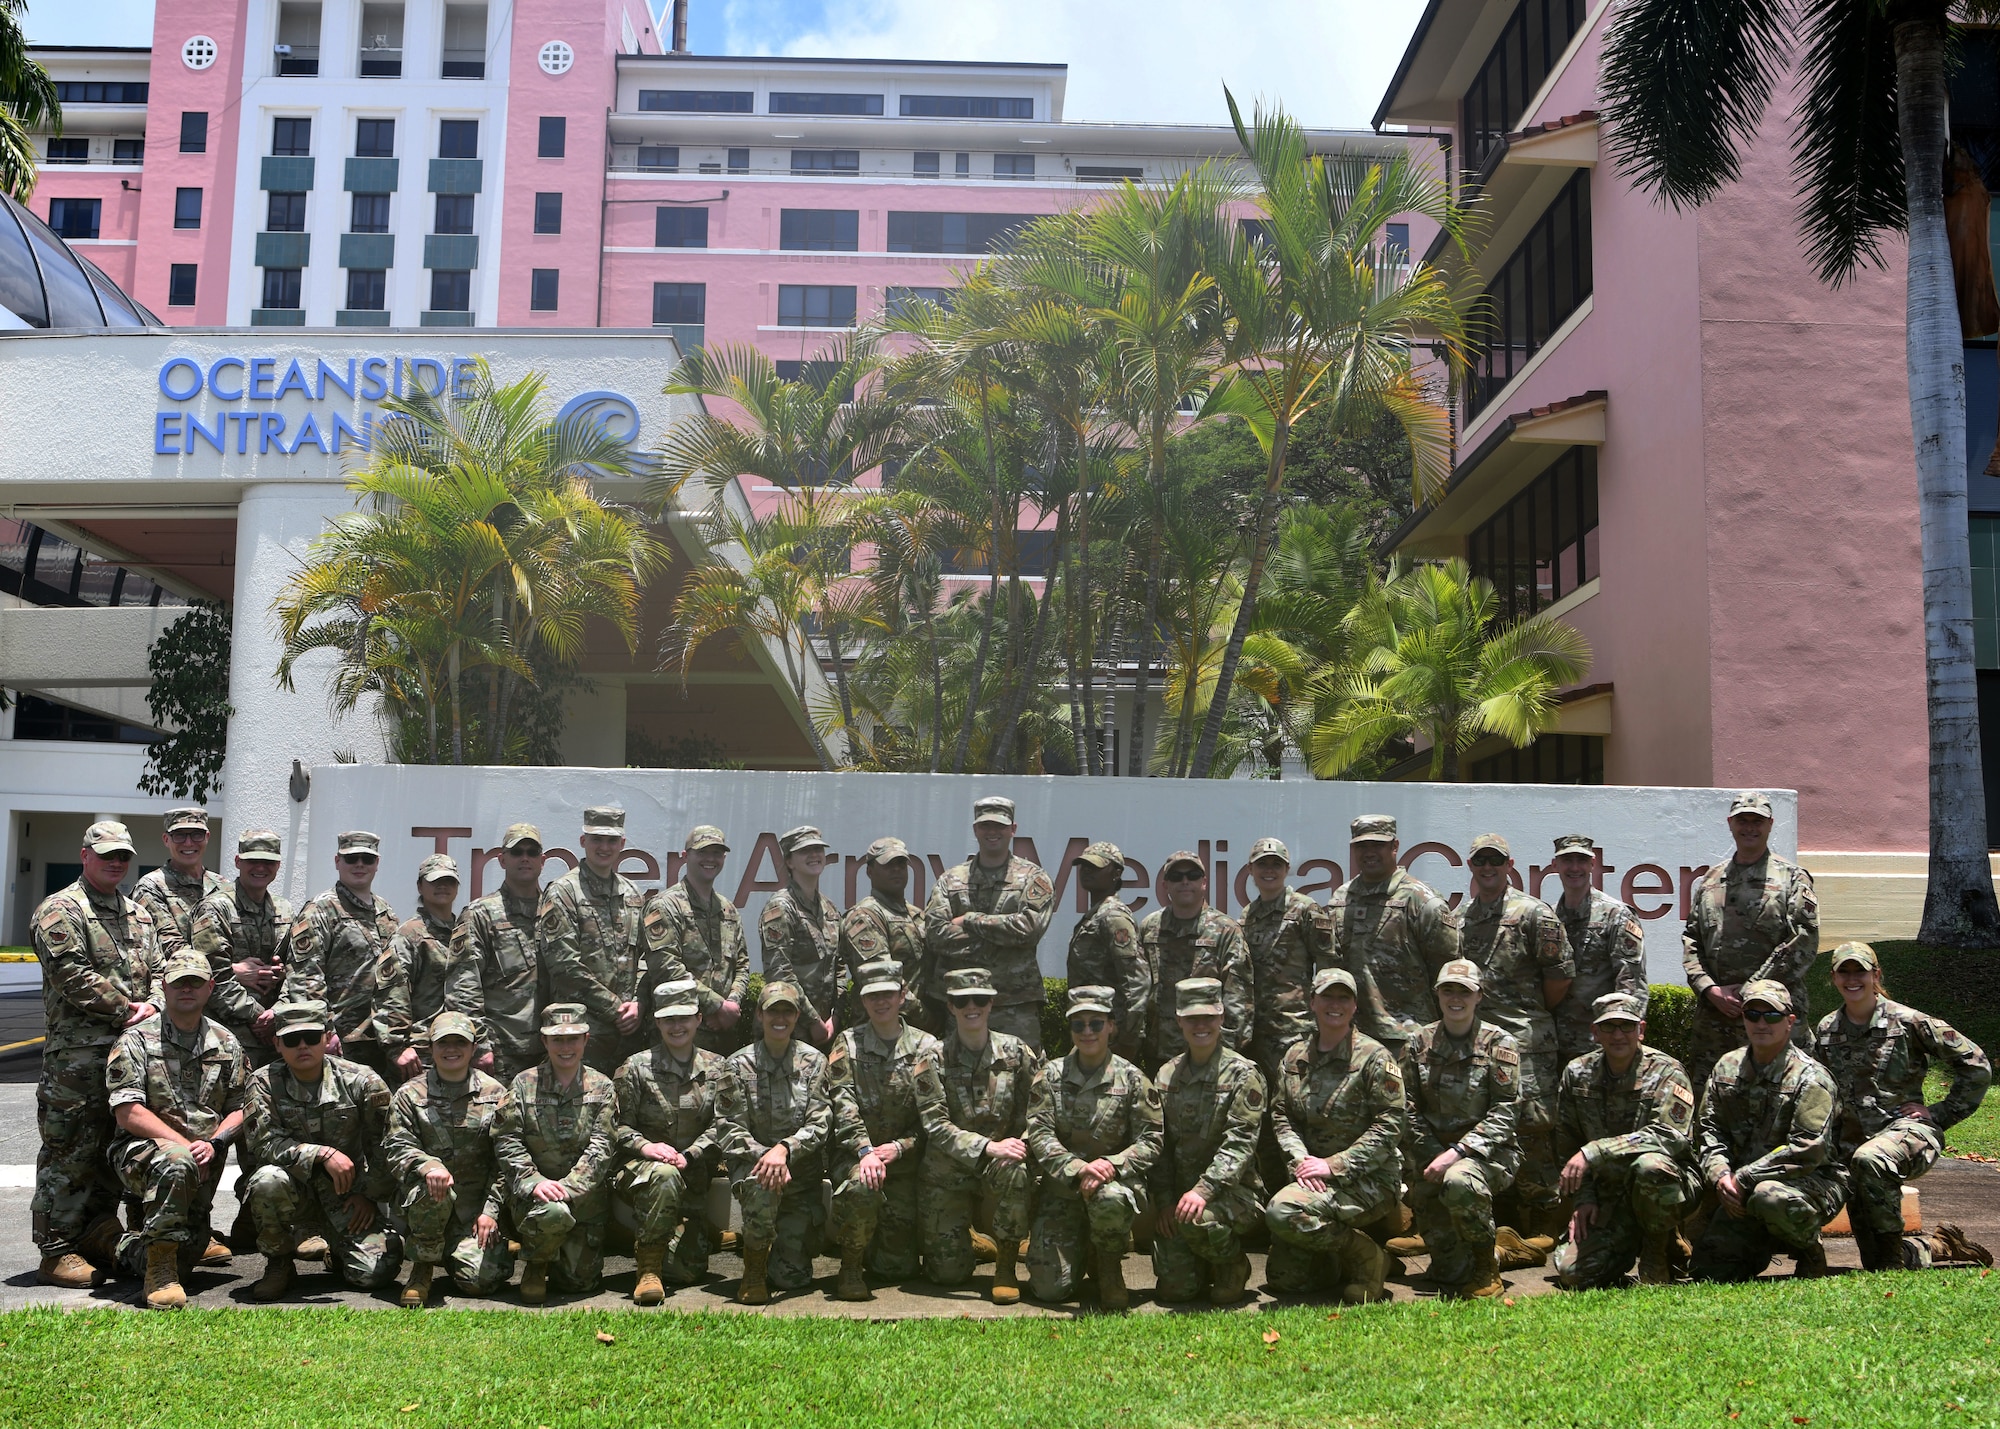 Members from the 104th Fighter Wing Medical Group pose for a group photo during their Medical Field Annual Training at Tripler Army Medical Center, Honolulu, Hawaii, May 3, 2022. This training allowed 104MDG members the opportunity to train in and provide support to an active-duty military hospital. (U.S. Air National Guard Photo by Senior Airman Camille Lienau)